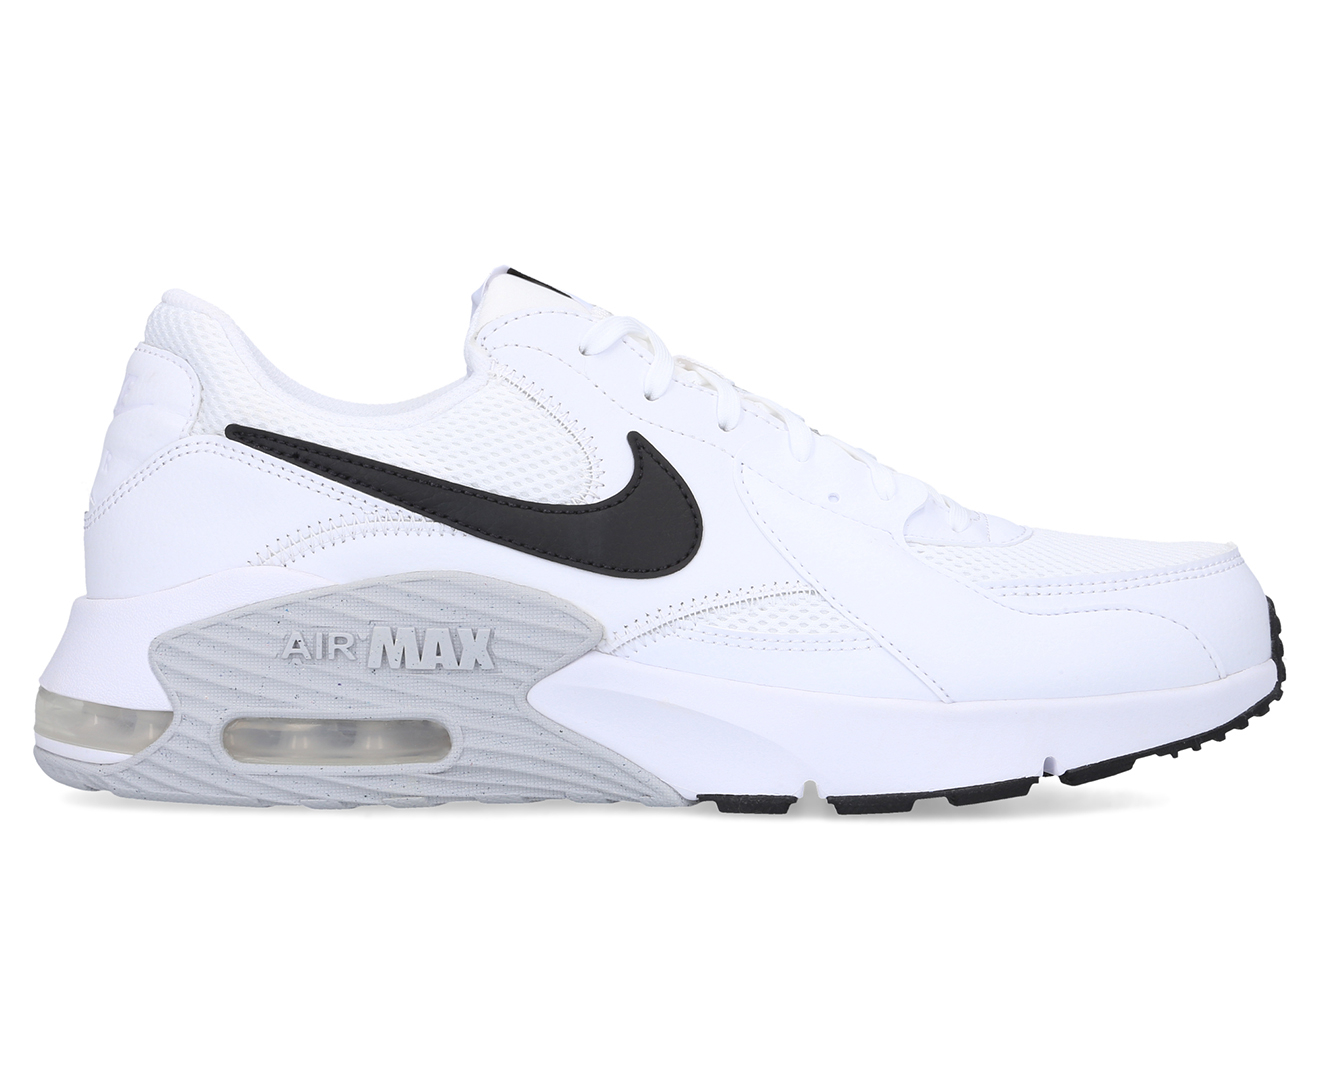 Nike Men's Air Max Excee Sneakers - White/Black/Pure Platinum | Catch.co.nz